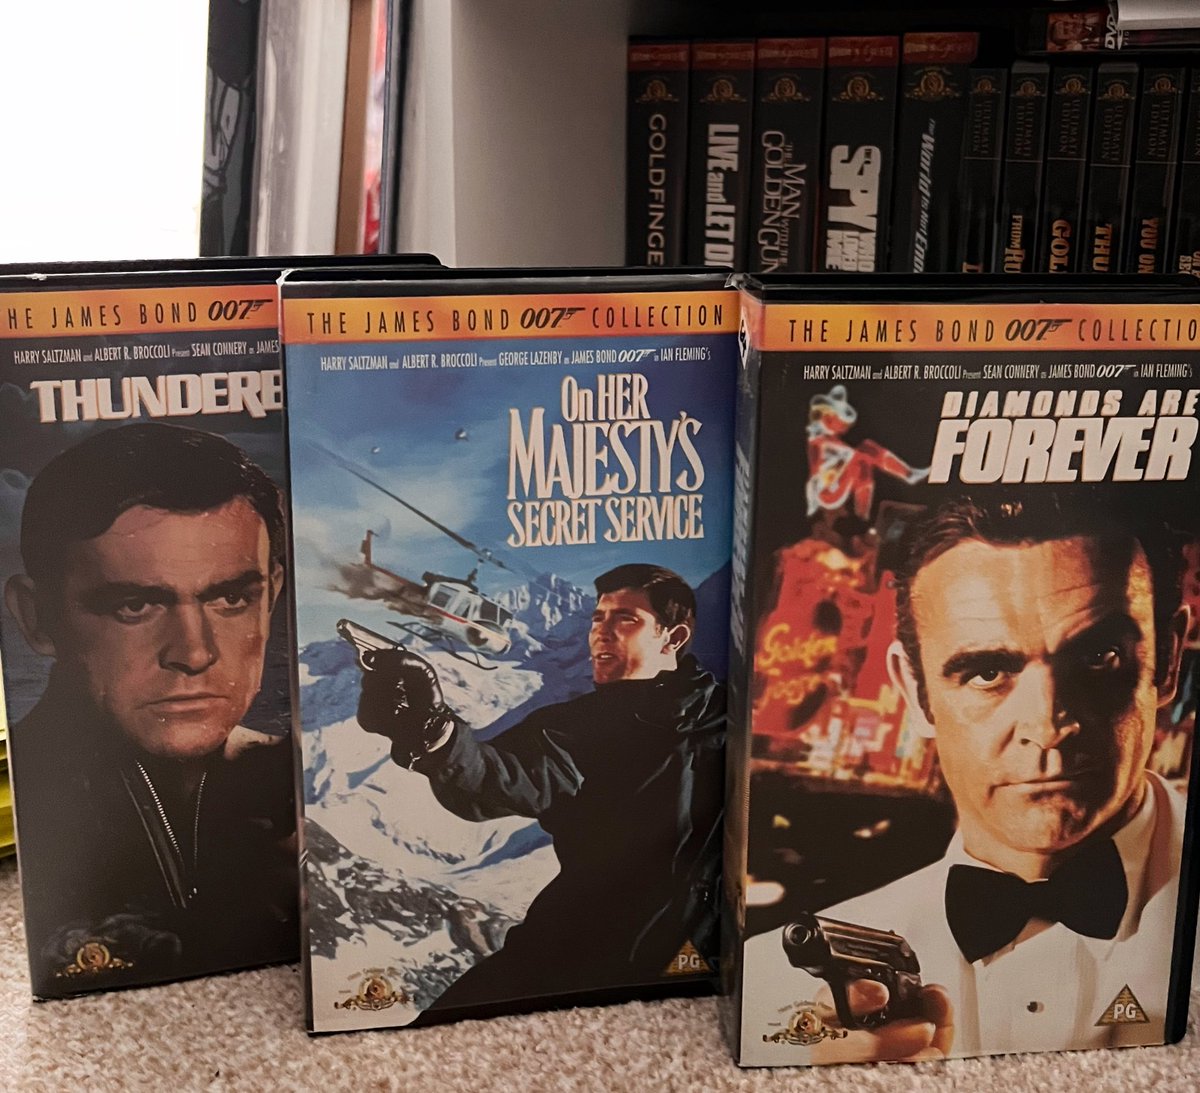 Today I was in town and came across a bunch of Bond VHS tapes! Couldn’t get all of the ones there but the five behind these three that i’ve had almost all my life will finally have some company (and 1969-1977 will be complete)! #JamesBond